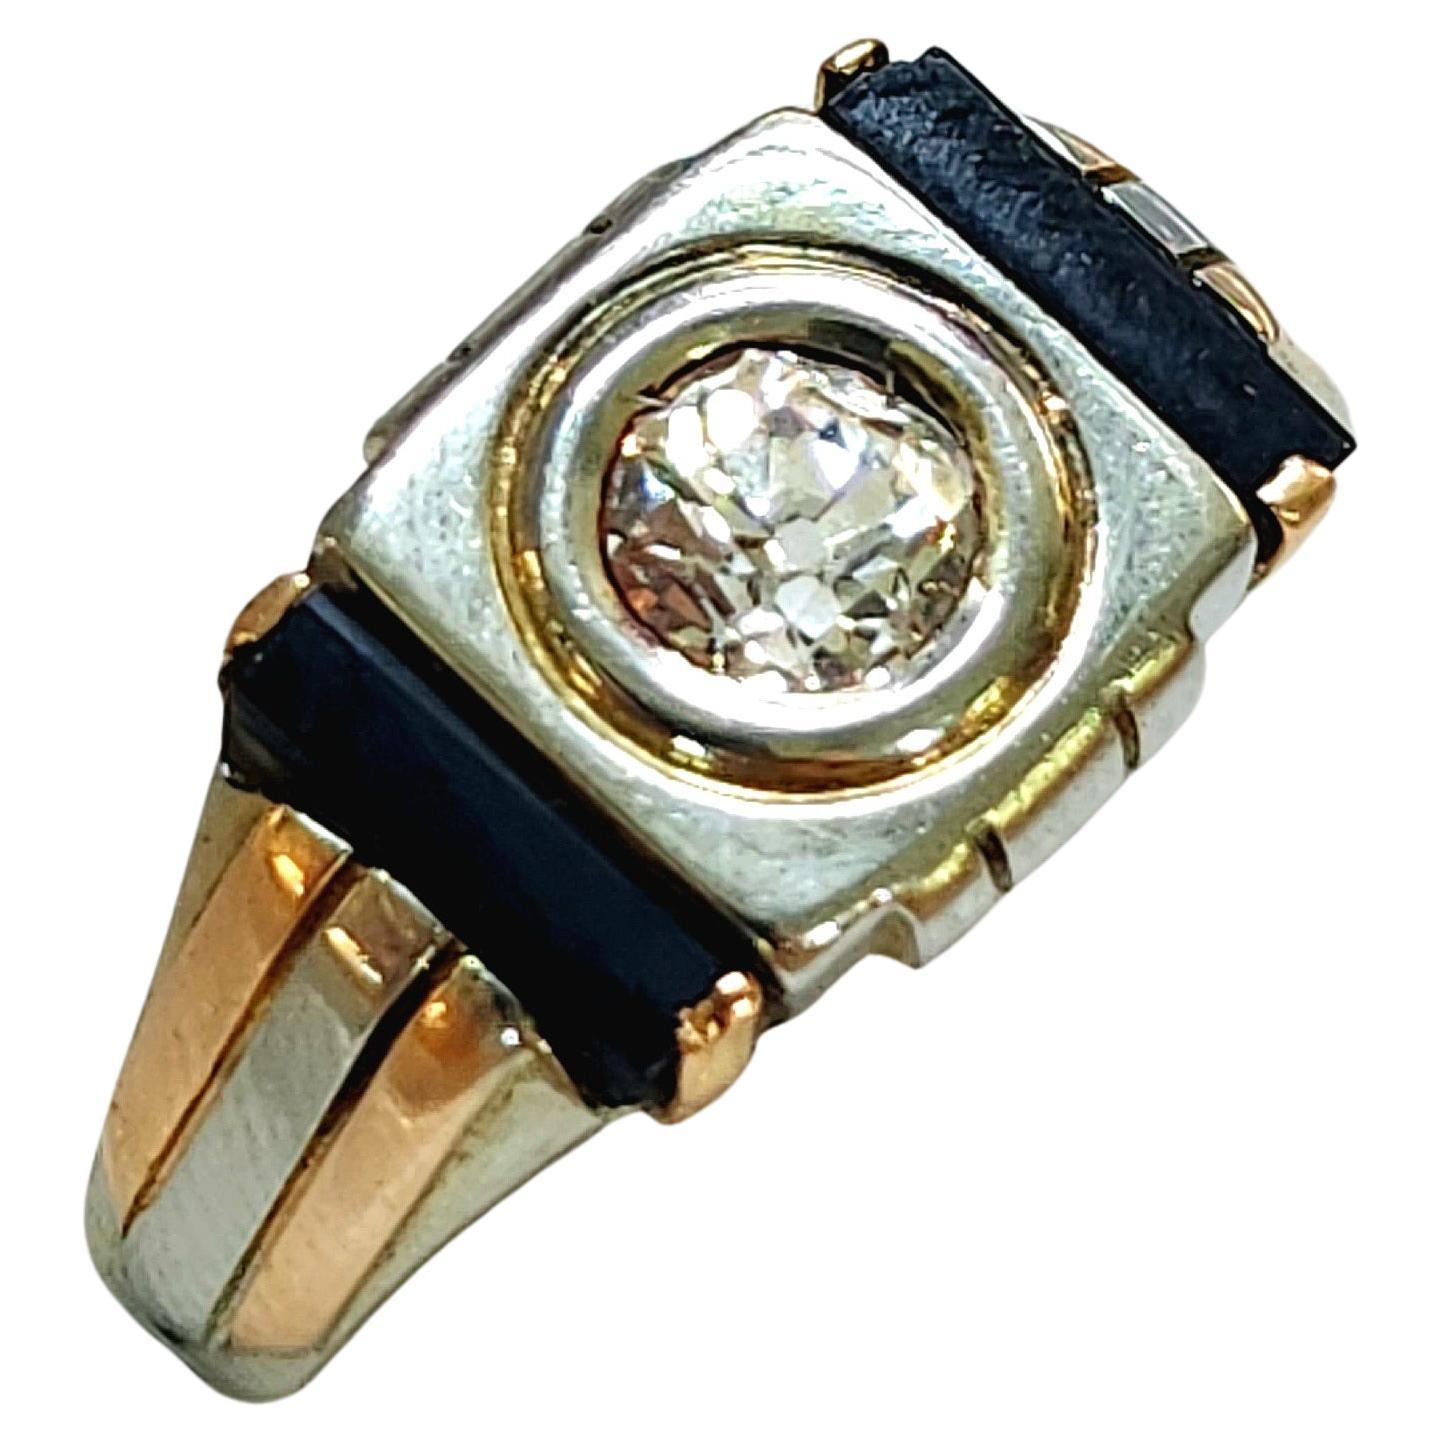 Antique Art Deco mans Ring in 2 tone 18k gold color centered with old mine cut diamond estimate weight 0.60 carats H color white vs clearity flanked with black onyx stones dates back to tje art deco era 1920/1925s